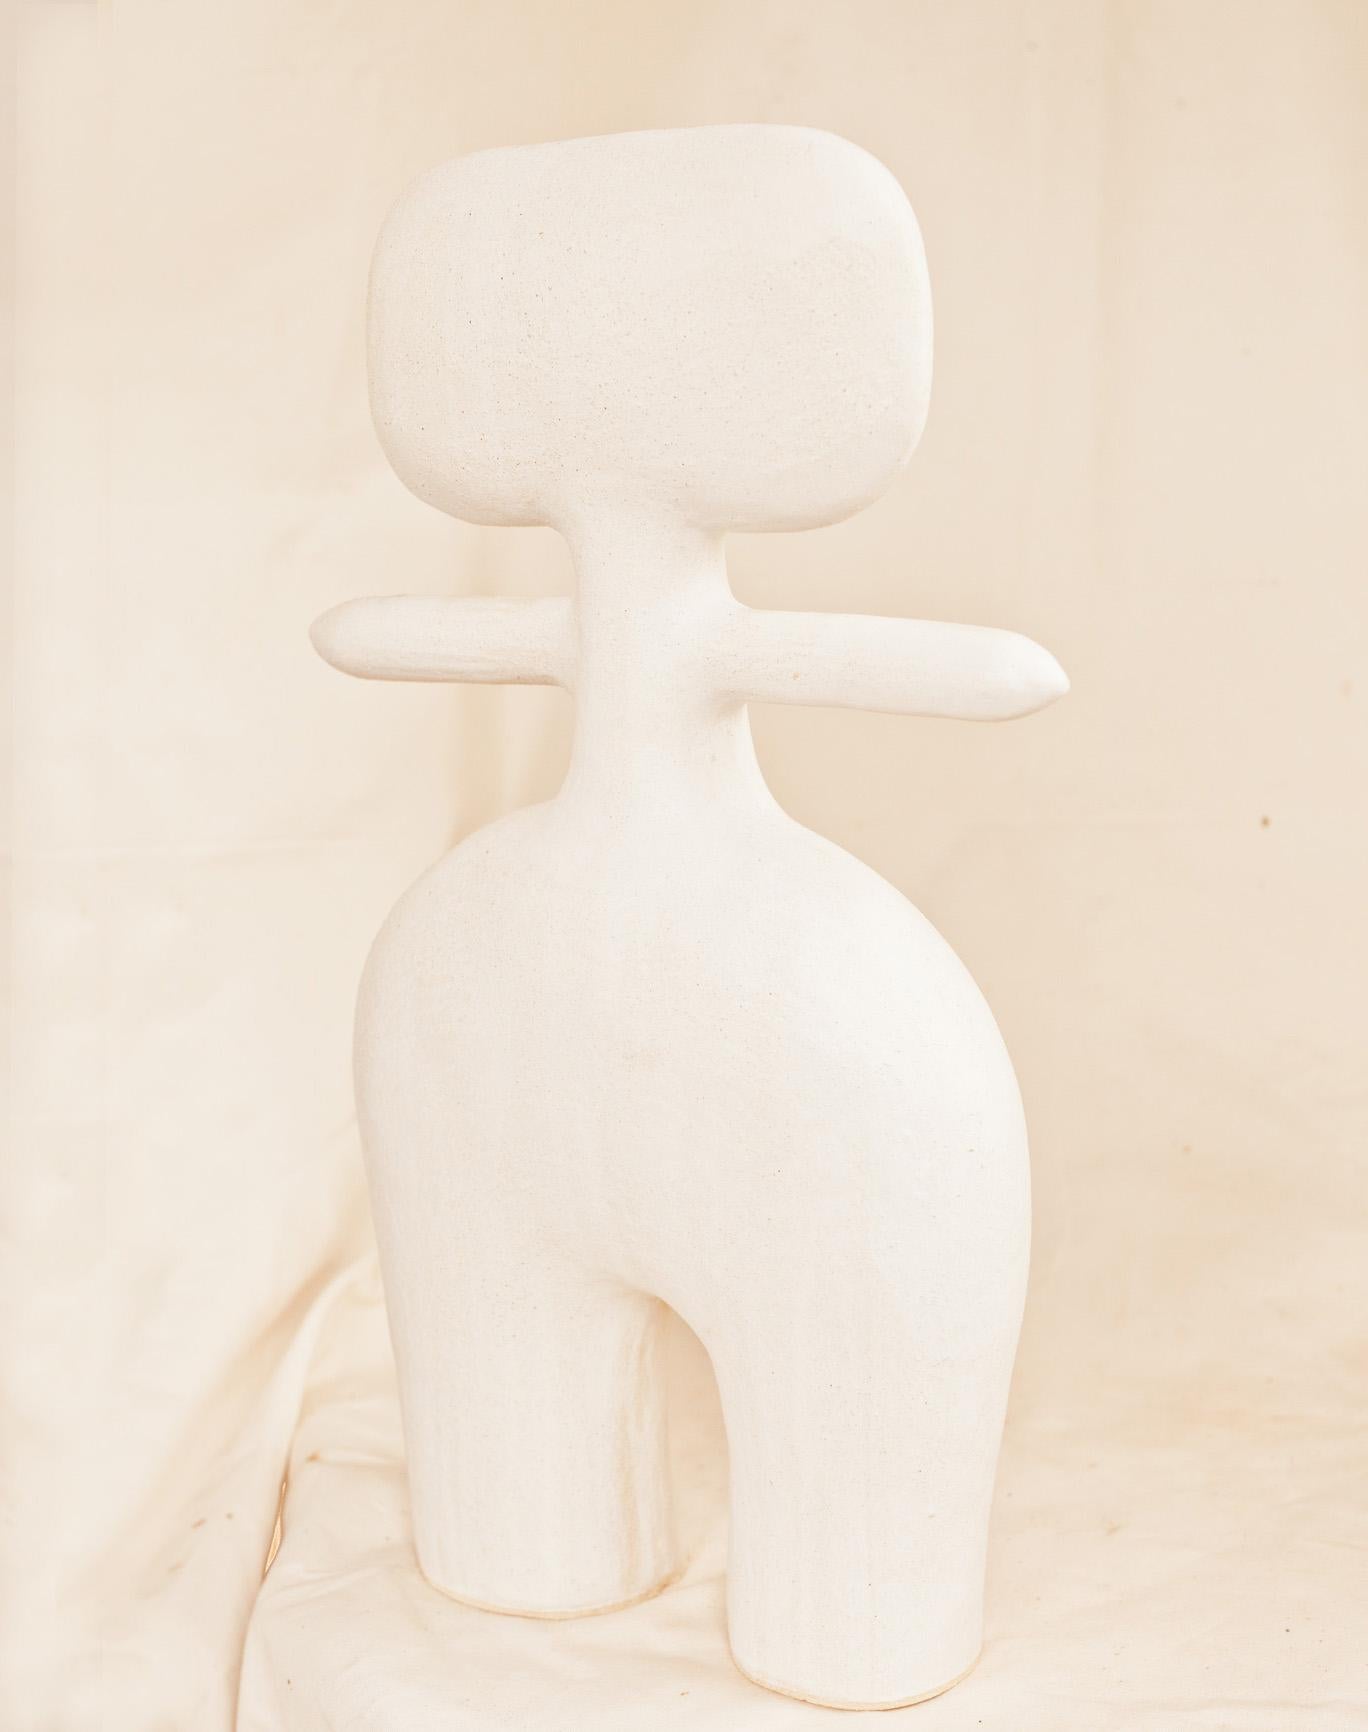 British Contemporary and Handcrafted, Haniwa Warrior 55 Decorative Piece by Noe Kuremoto For Sale